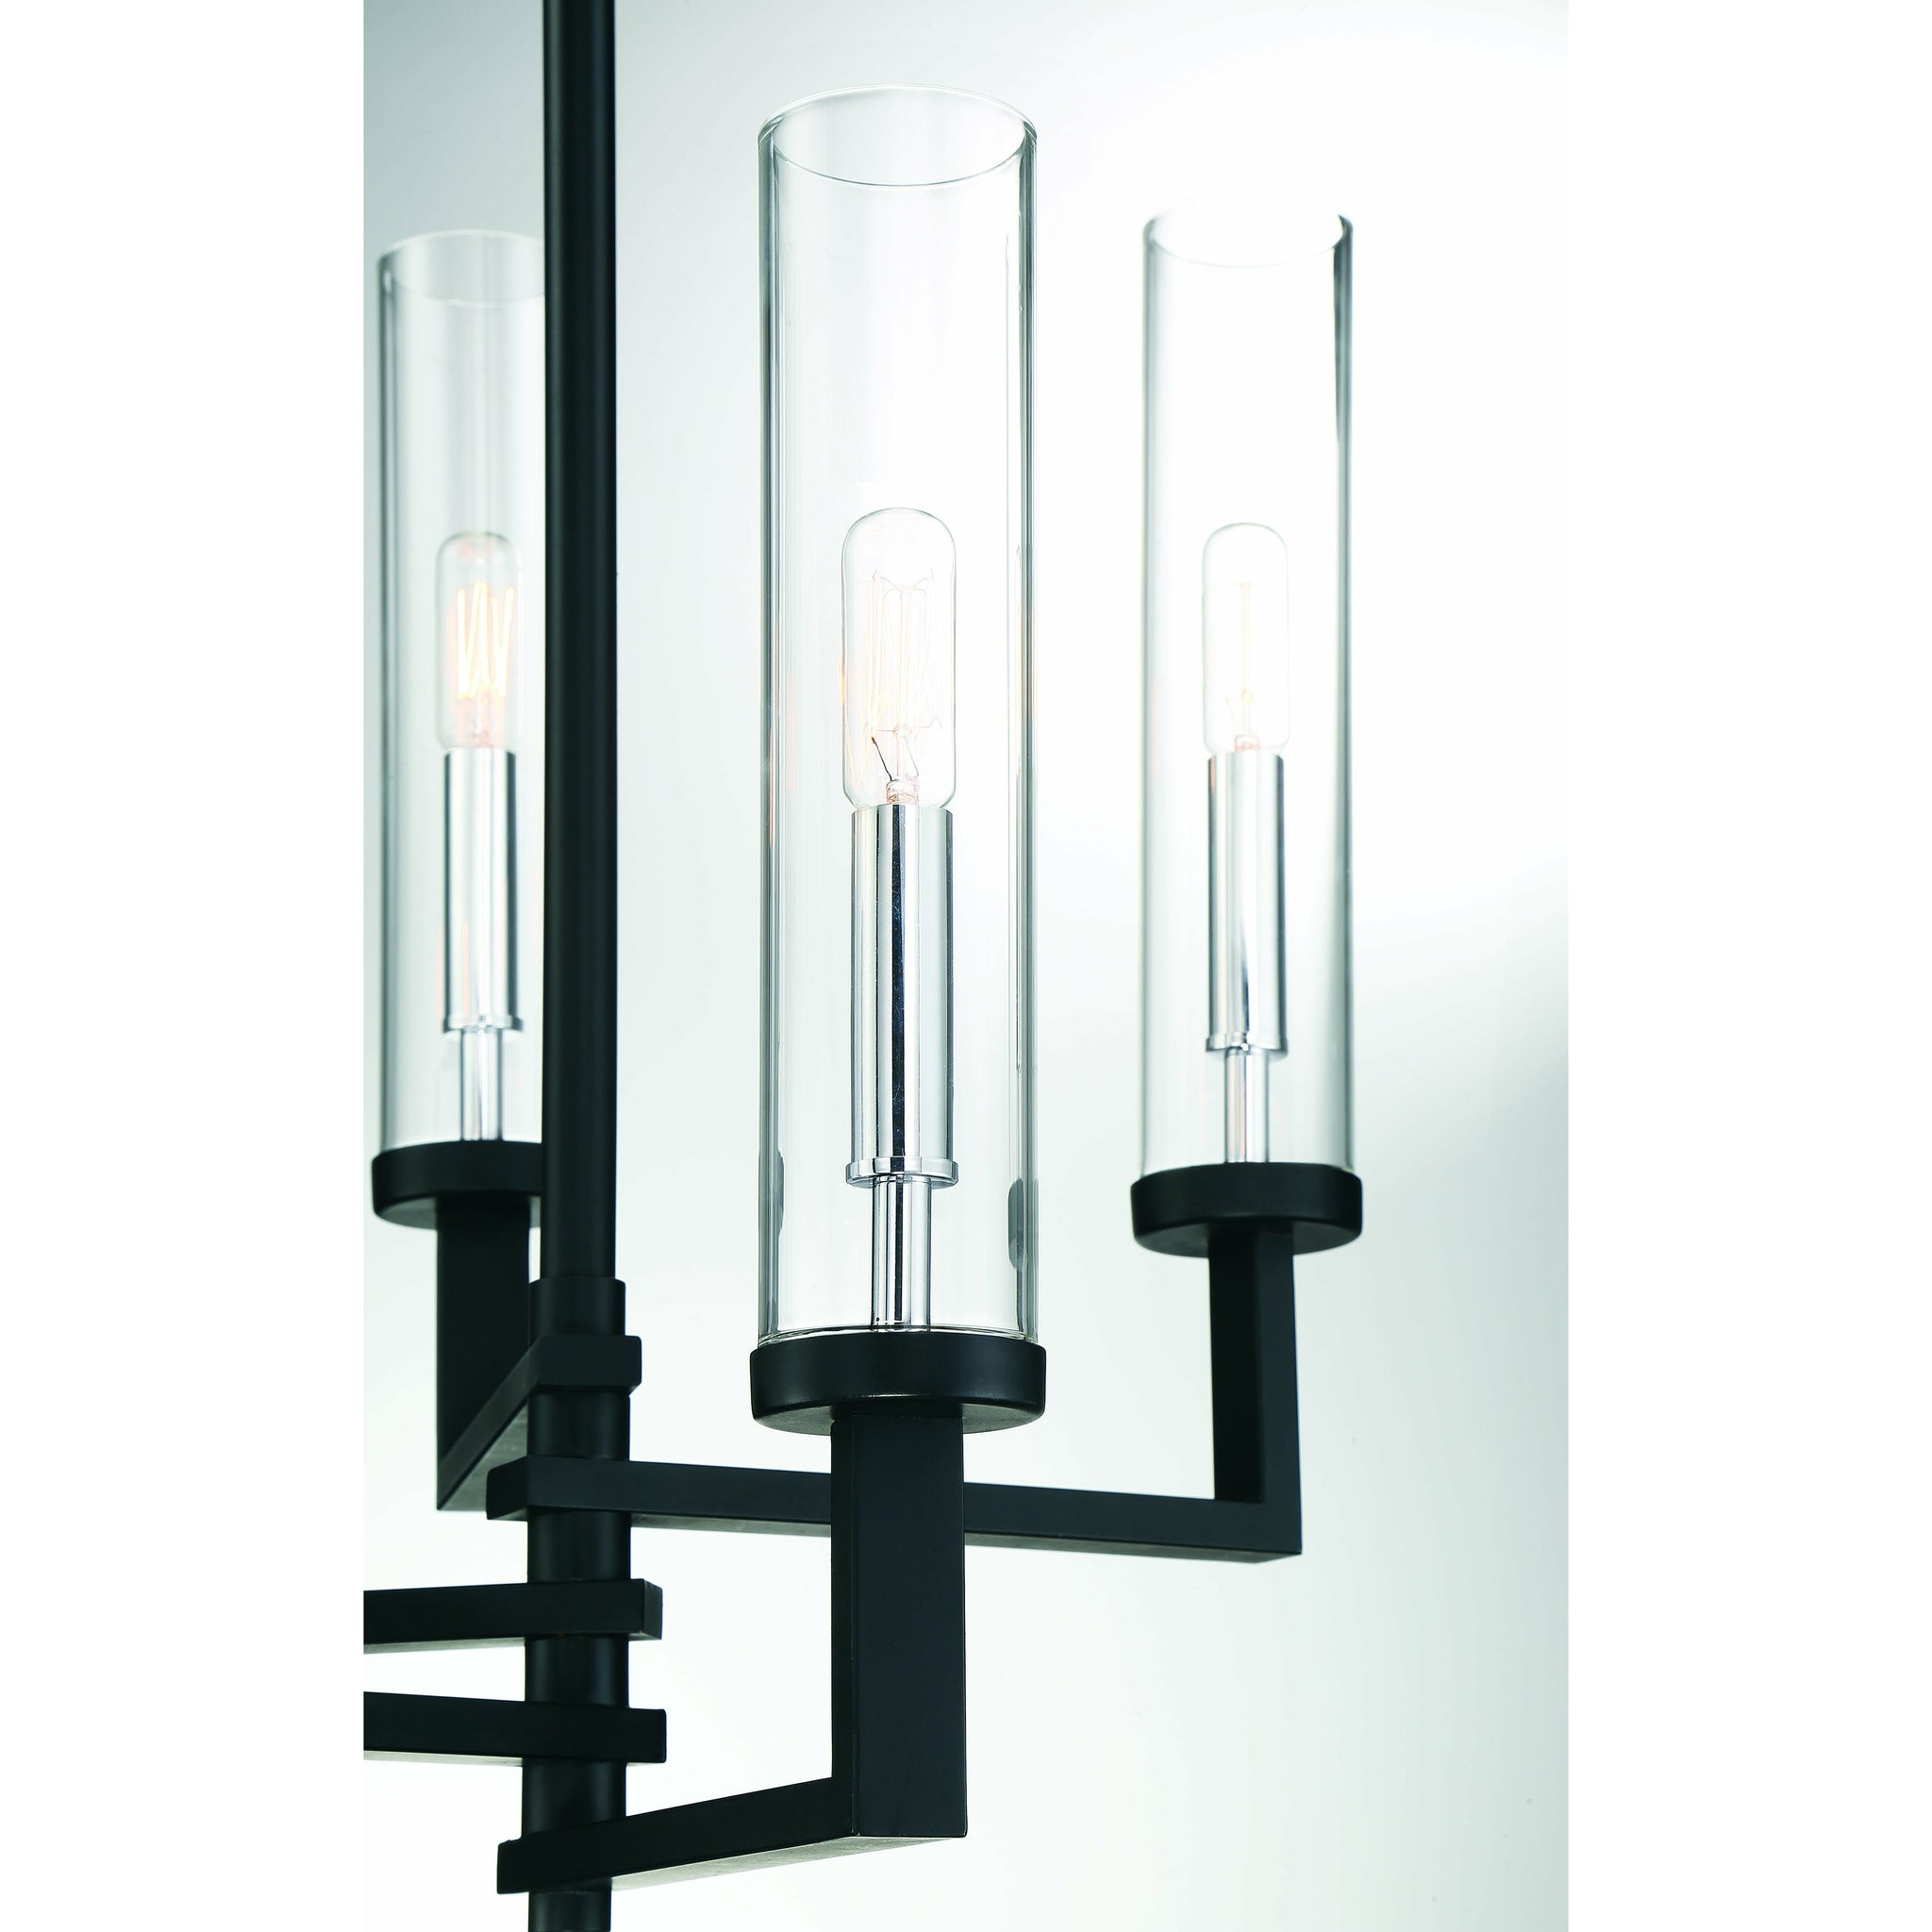 Folsom Chandelier Matte Black with Polished Chrome Accents